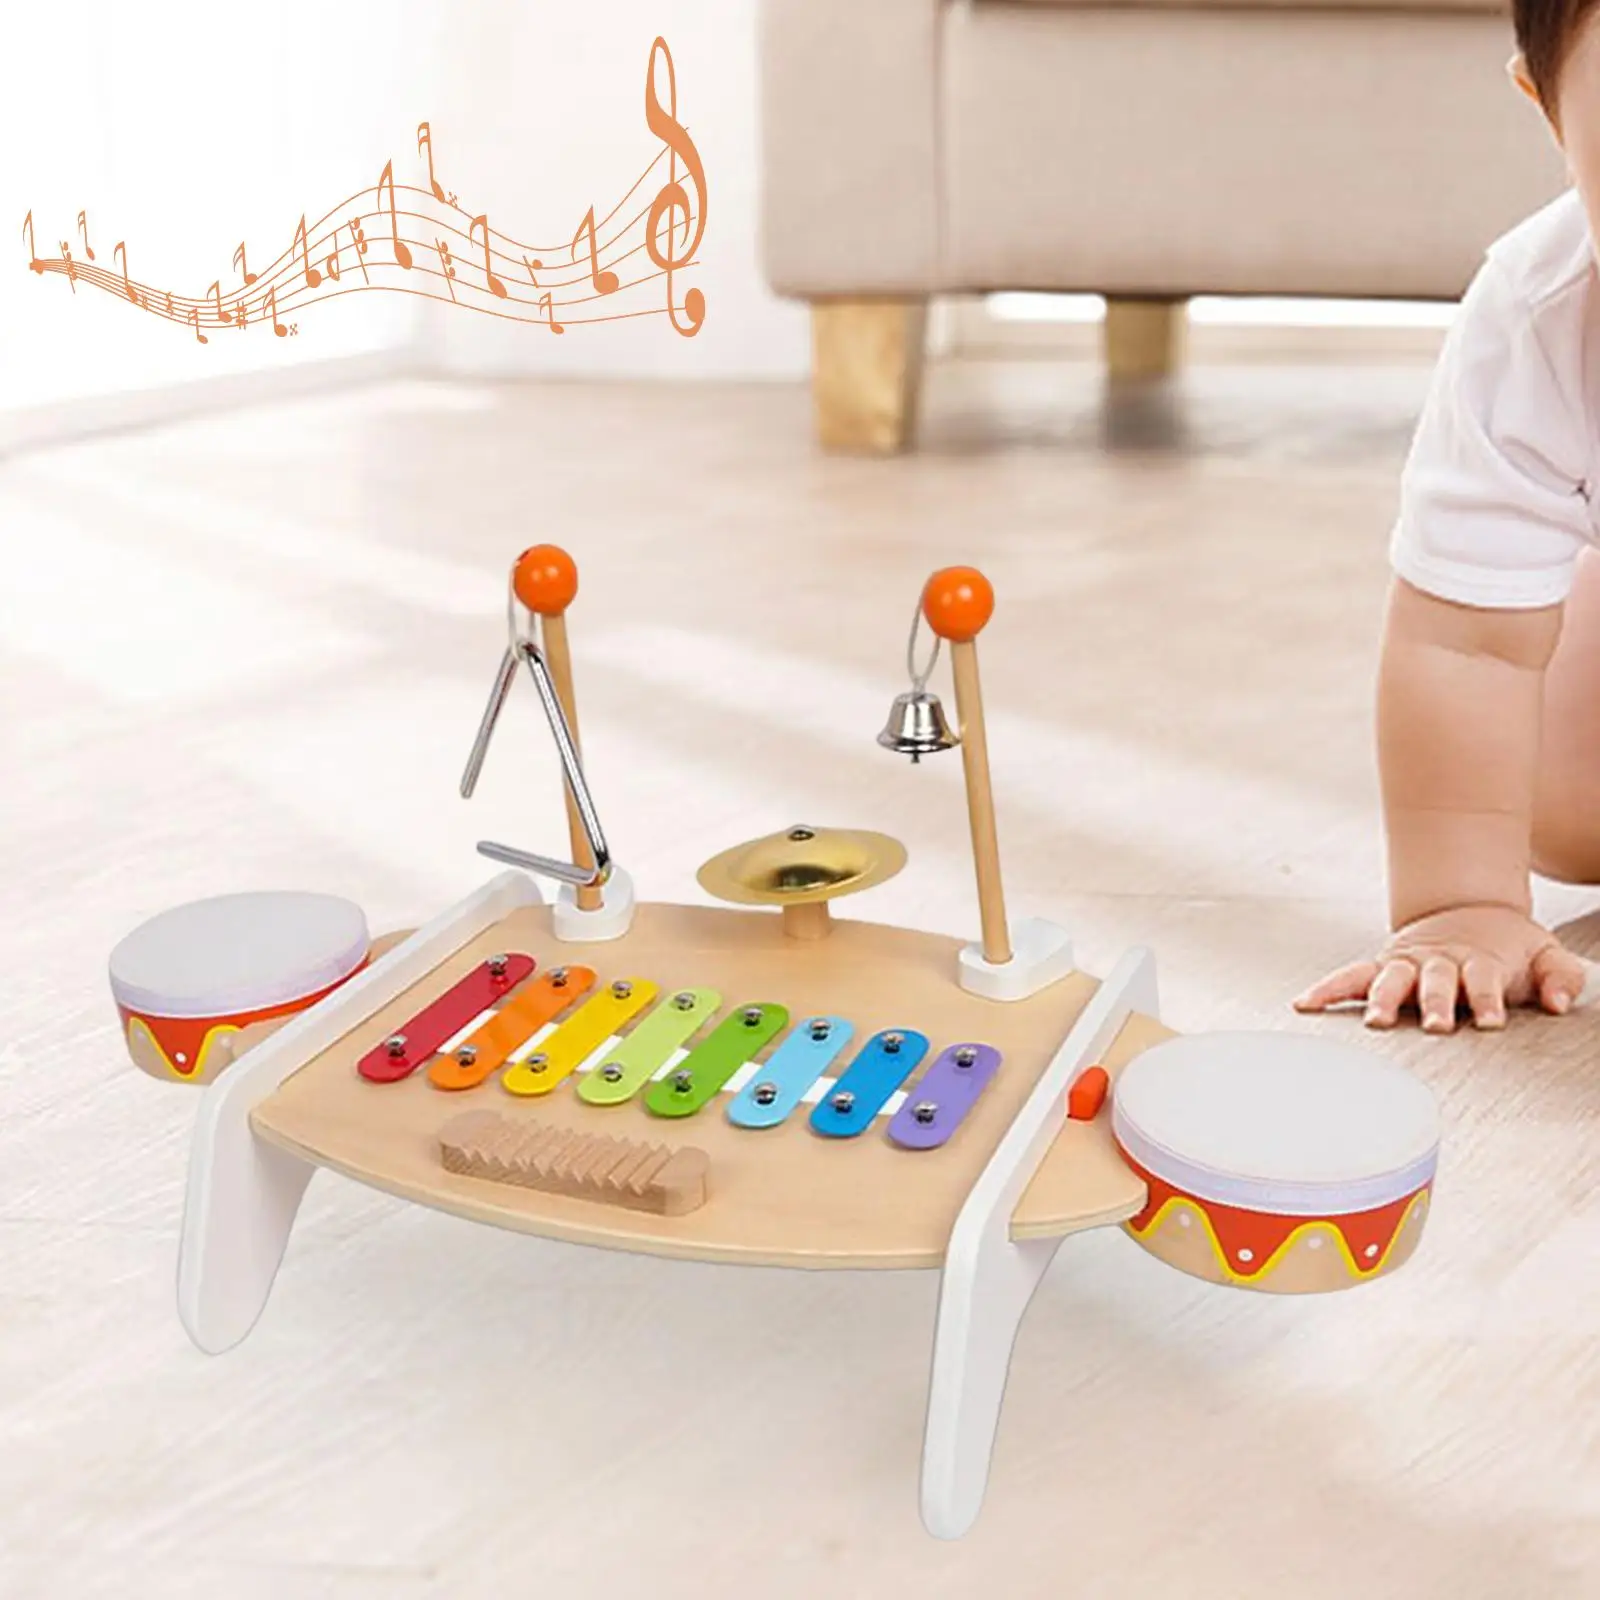 Portable Xylophone Musical Toy Wooden Percussion Toy Musical Instruments Musical Pounding Toy for Boys Beginner Girls Kids Gift